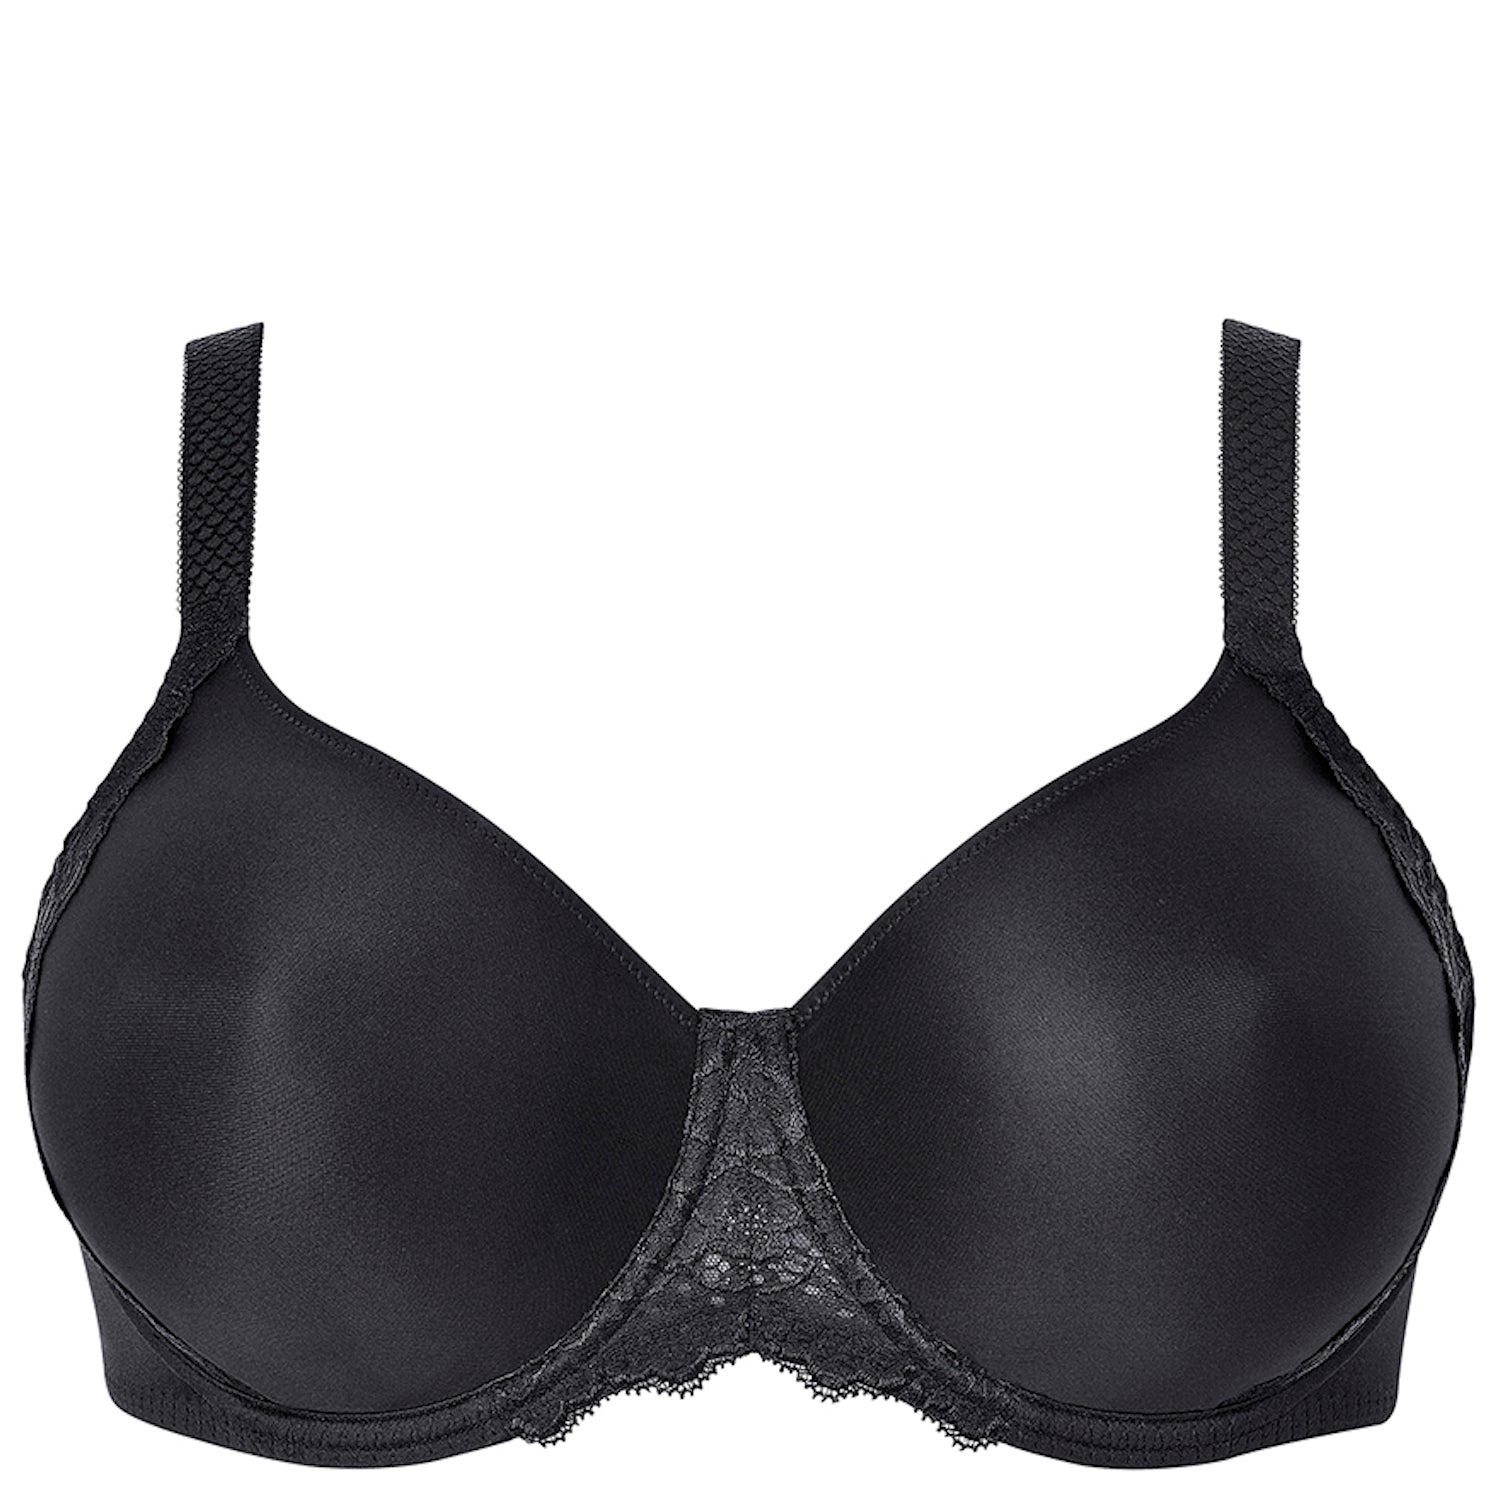 We Are Bra Fitting, Bra Design and Bra Production Experts in Canada and USA